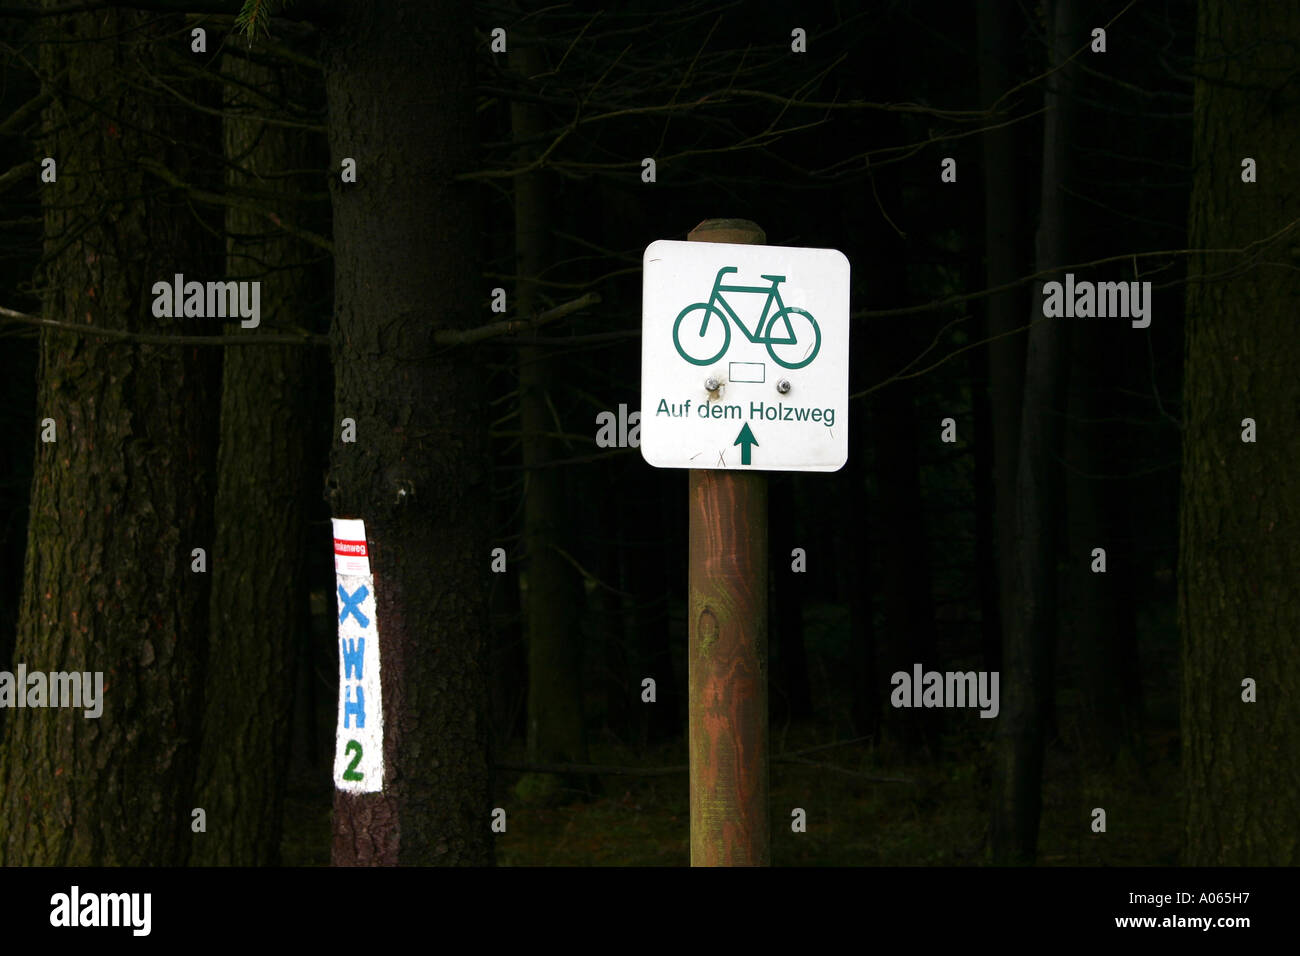 Signboard with a cycles figure seen amidst a woody area Stock Photo